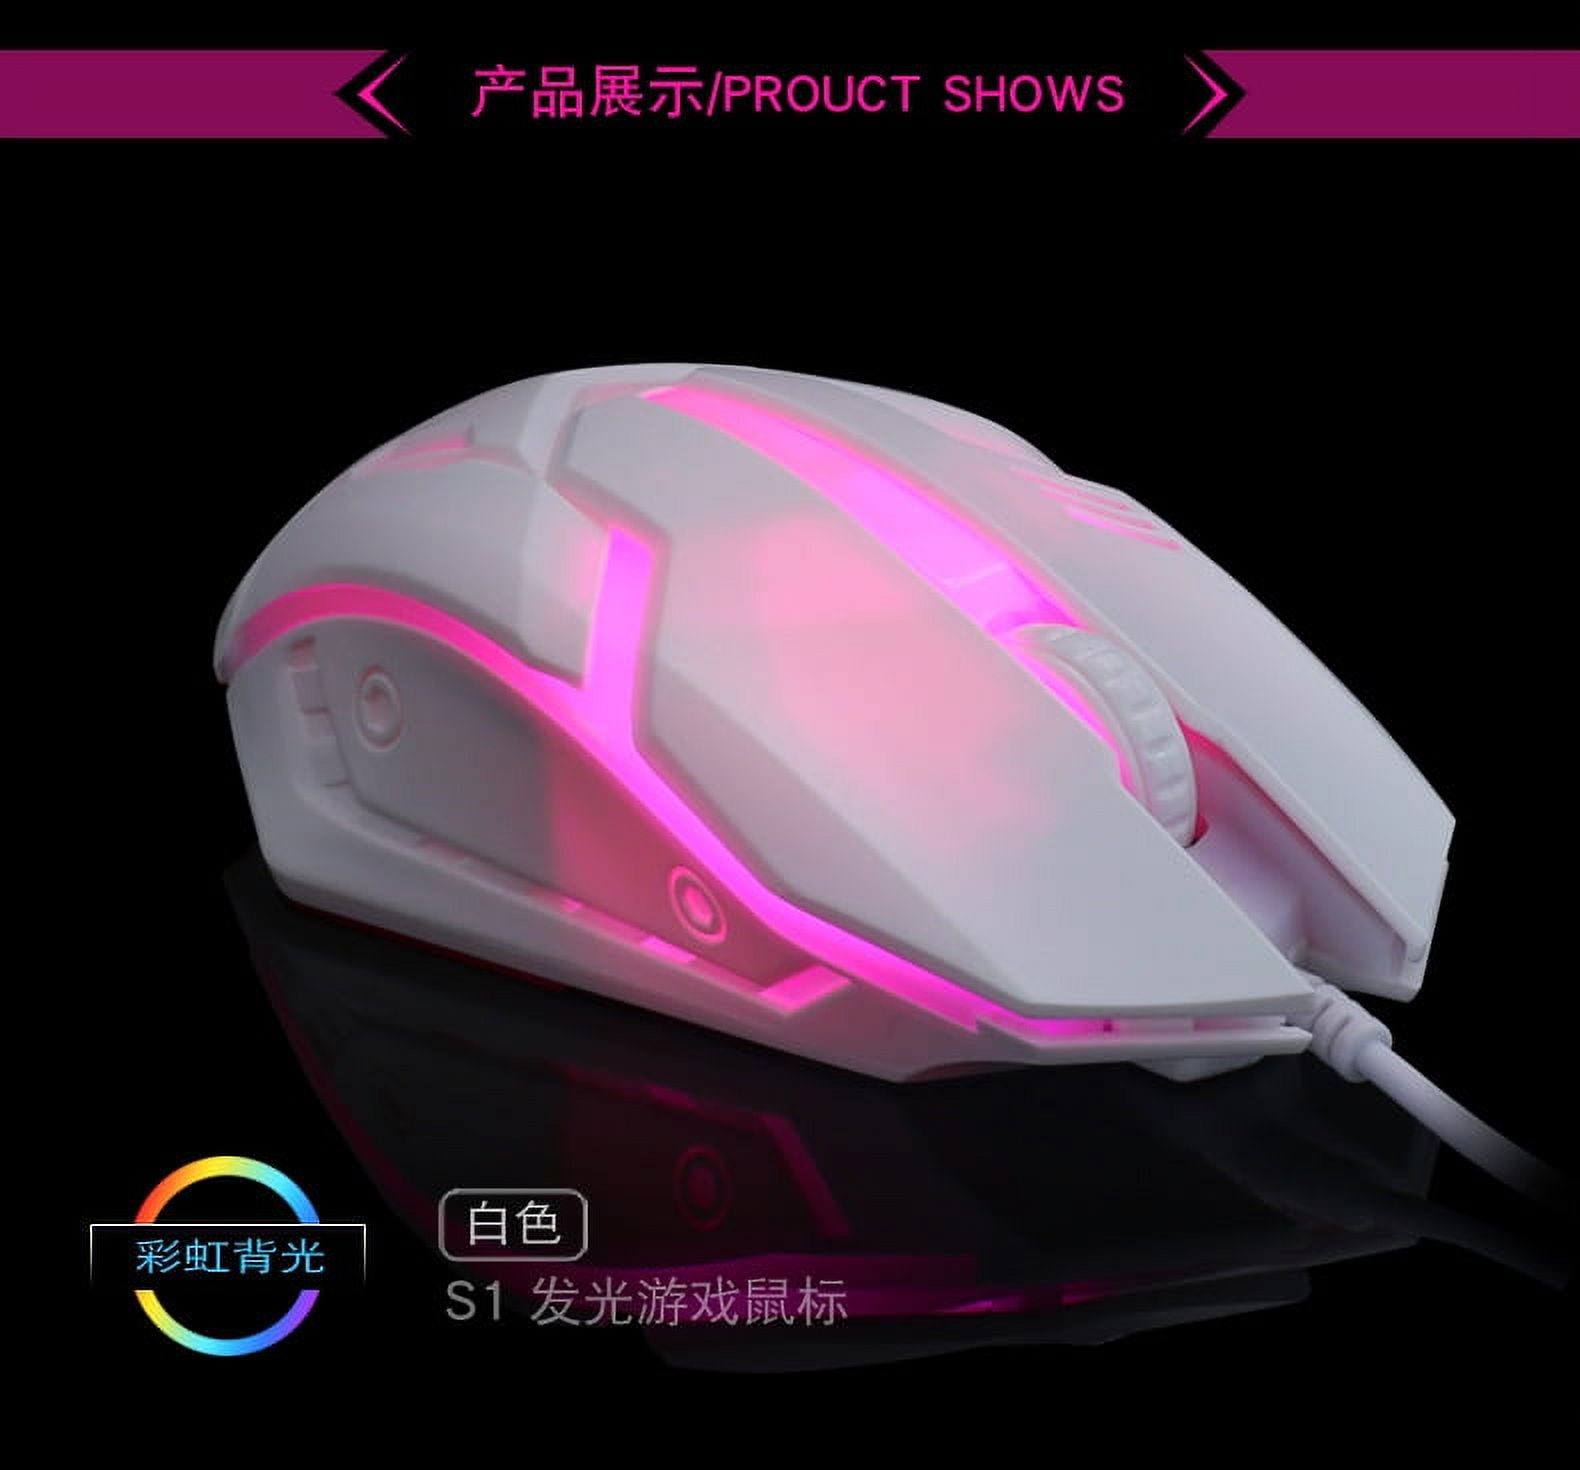 MMW3 wireless Gaming mouse RGB Flow lighting ultralight 79g 3200DPI power  saving rechargeable RGB Gaming mouse black/pink/White